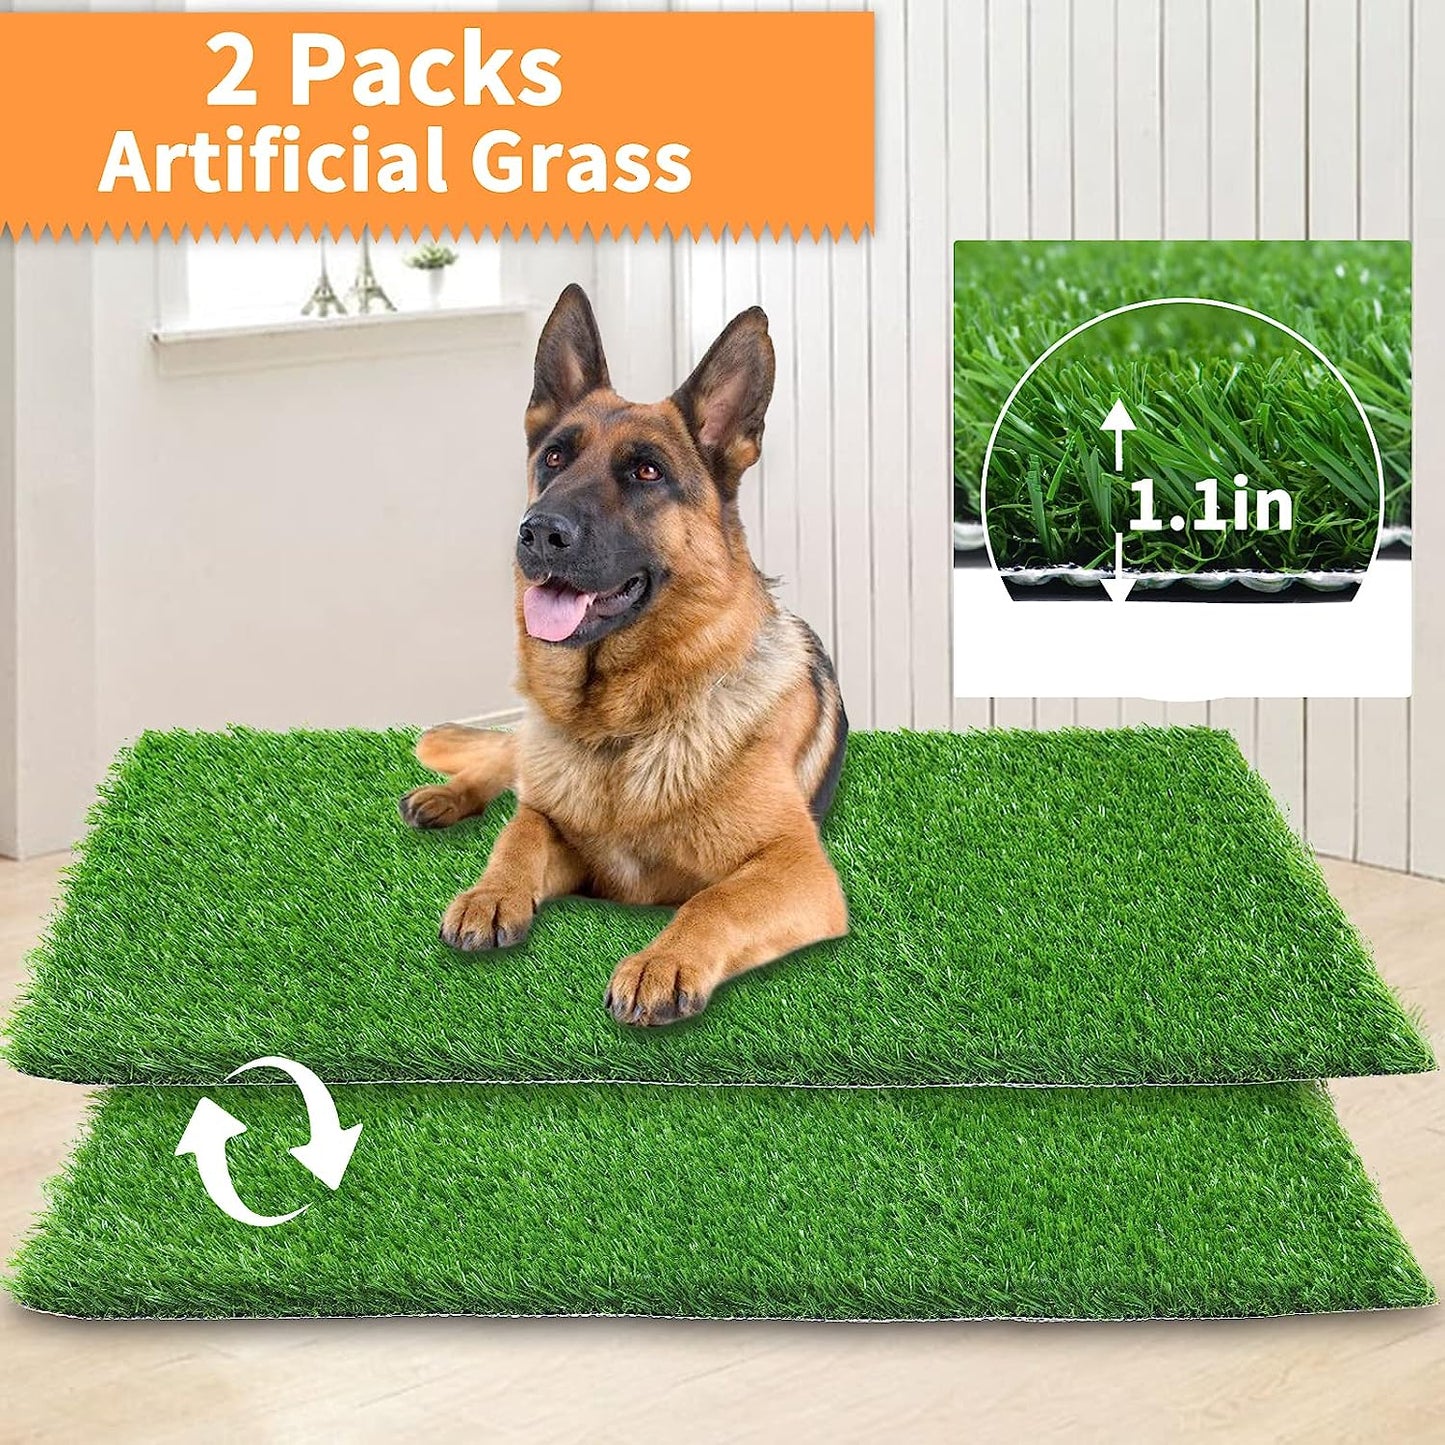 35in x 23in Extra Large Grass Porch Potty Tray, 2-Pack Replacement Artificial Grass Puppy Training Pads